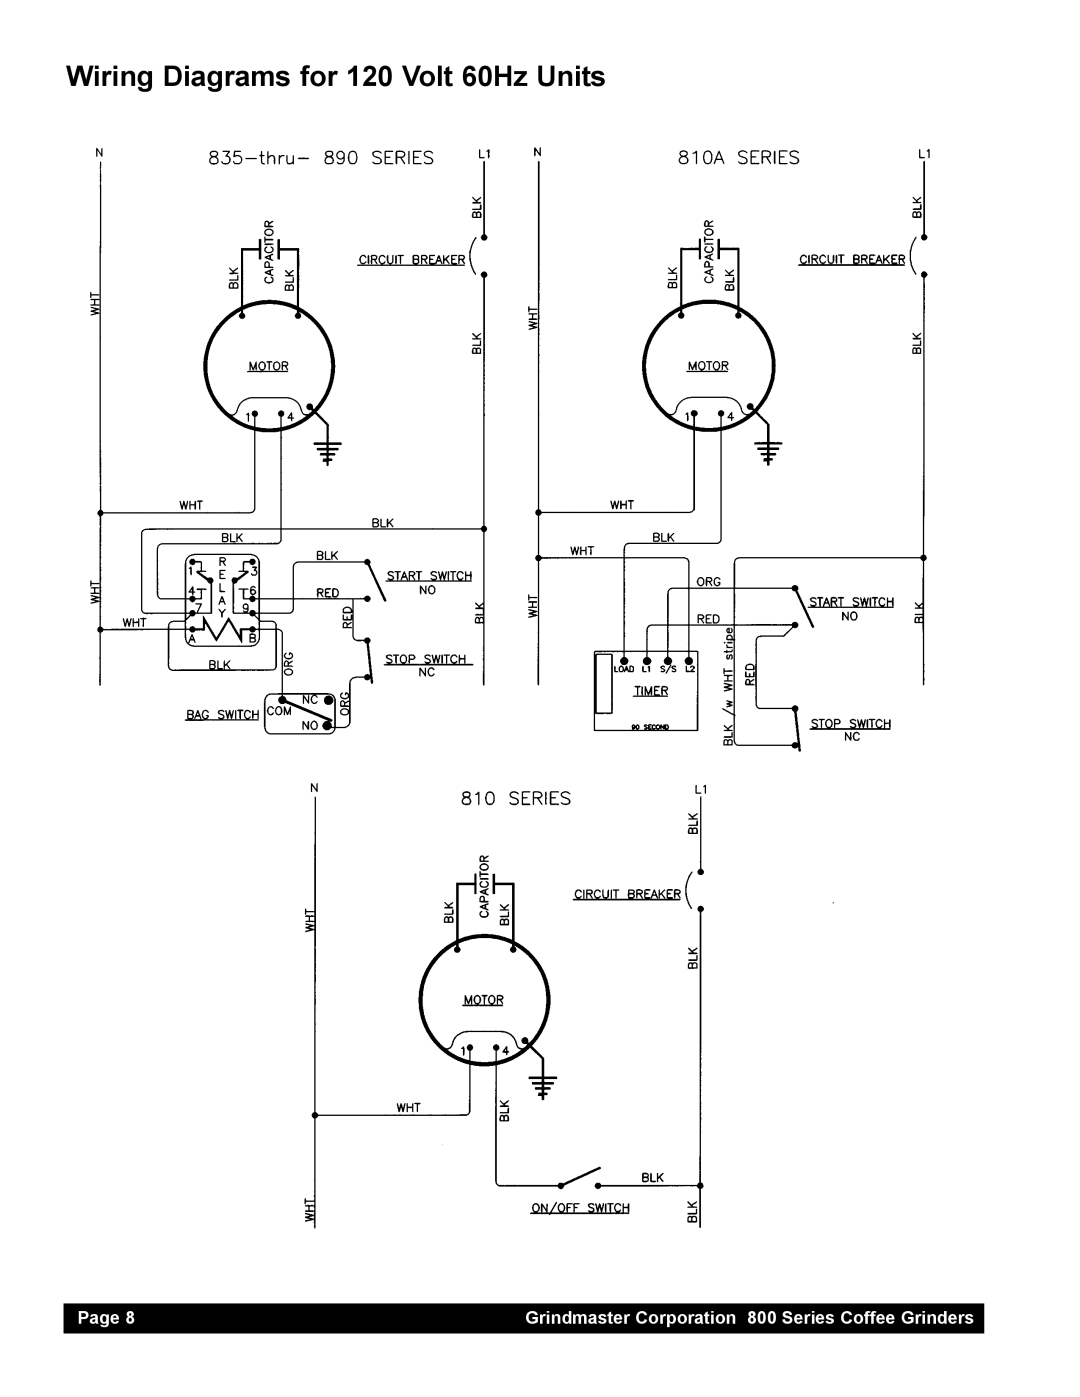 Grindmaster 835, 890, 810, 875 instruction manual Wiring Diagrams for 120 Volt 60Hz Units, Page 